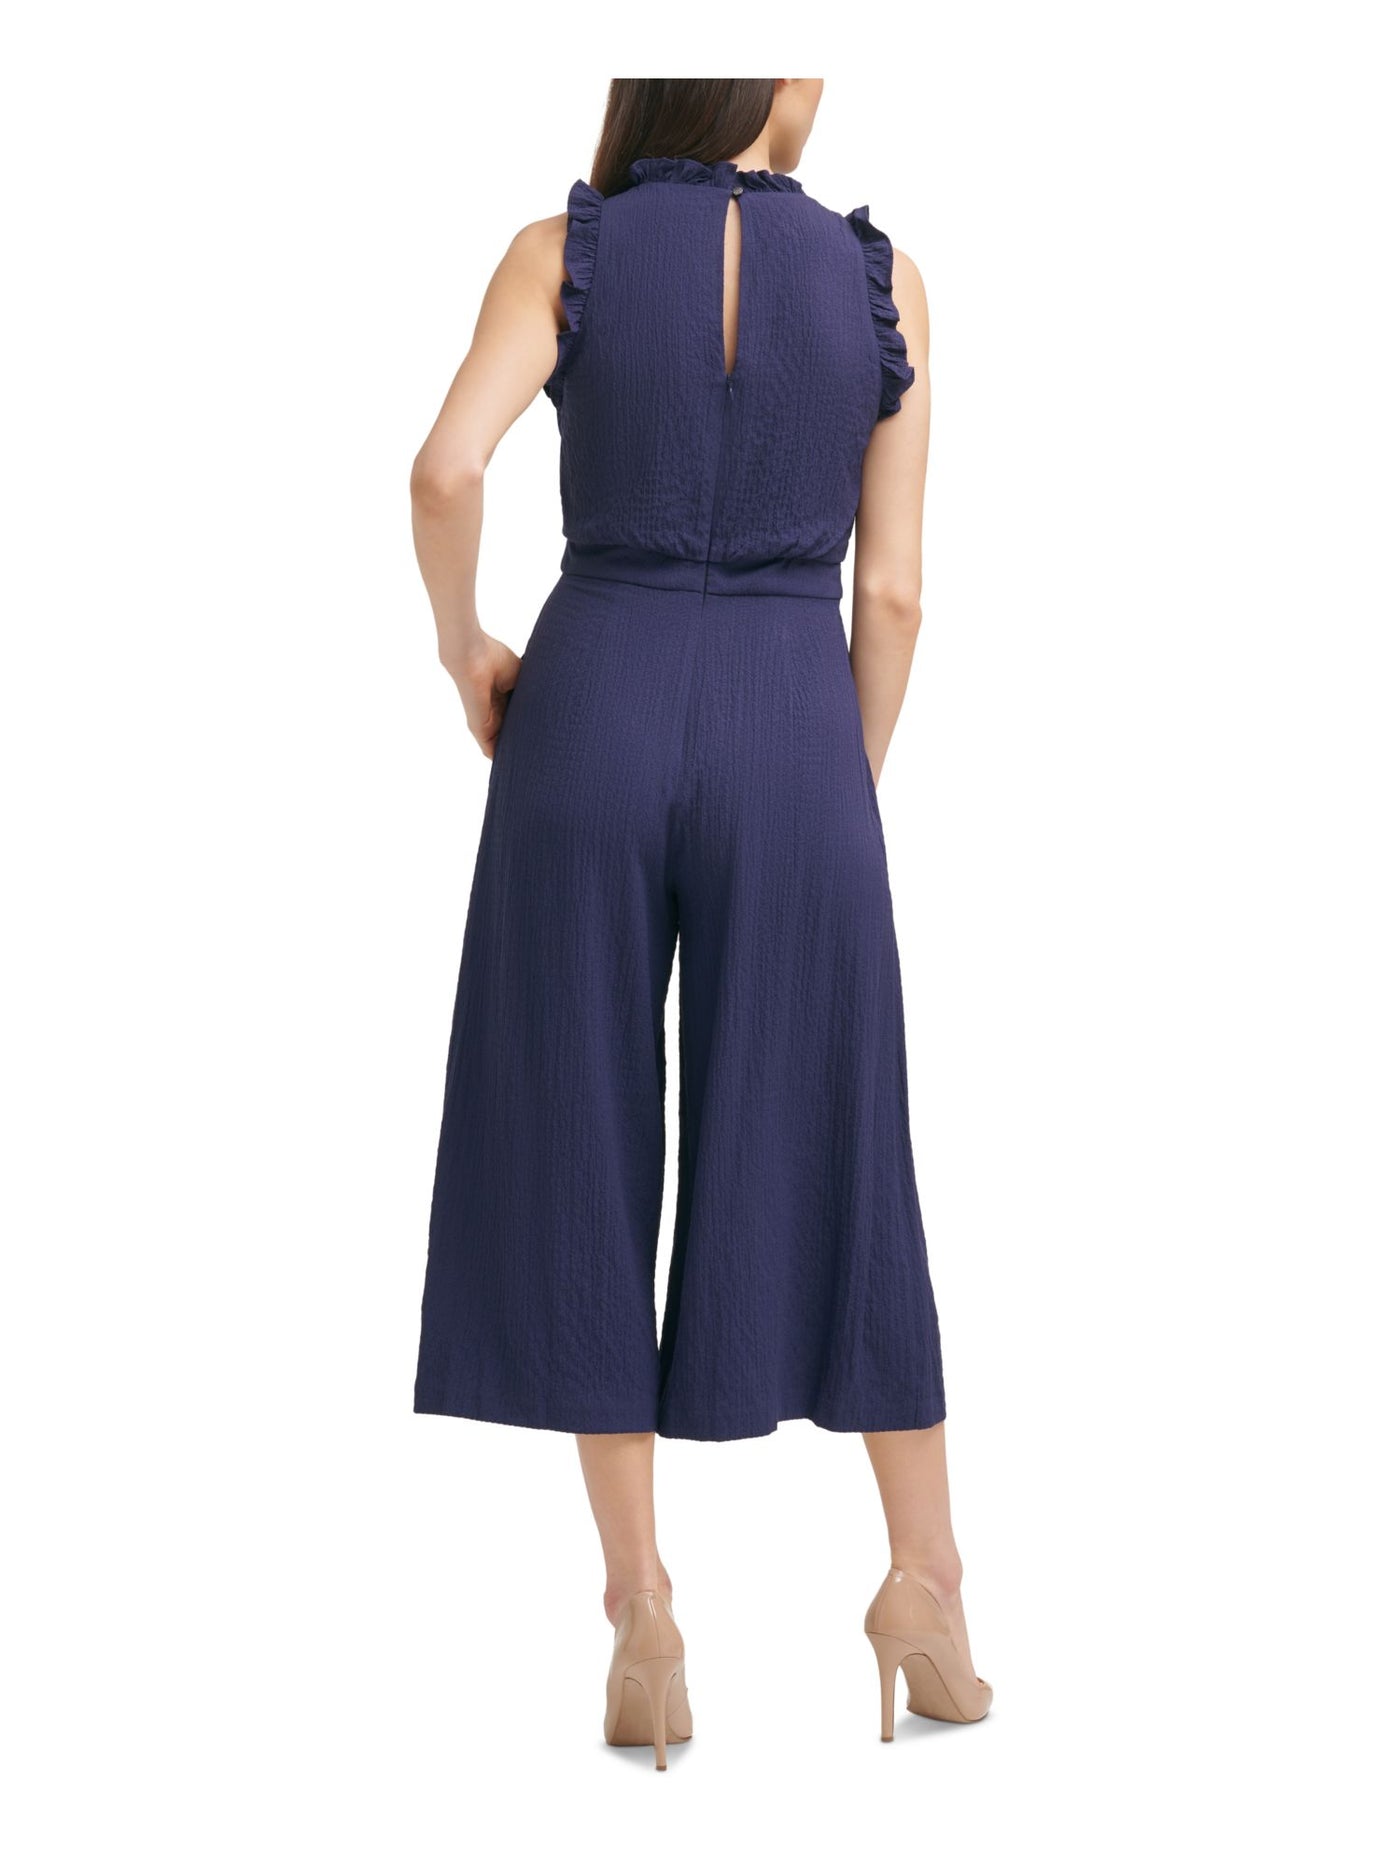 VINCE CAMUTO Womens Navy Ruffled Zippered Button Closure Sleeveless Wear To Work Cropped Jumpsuit 8